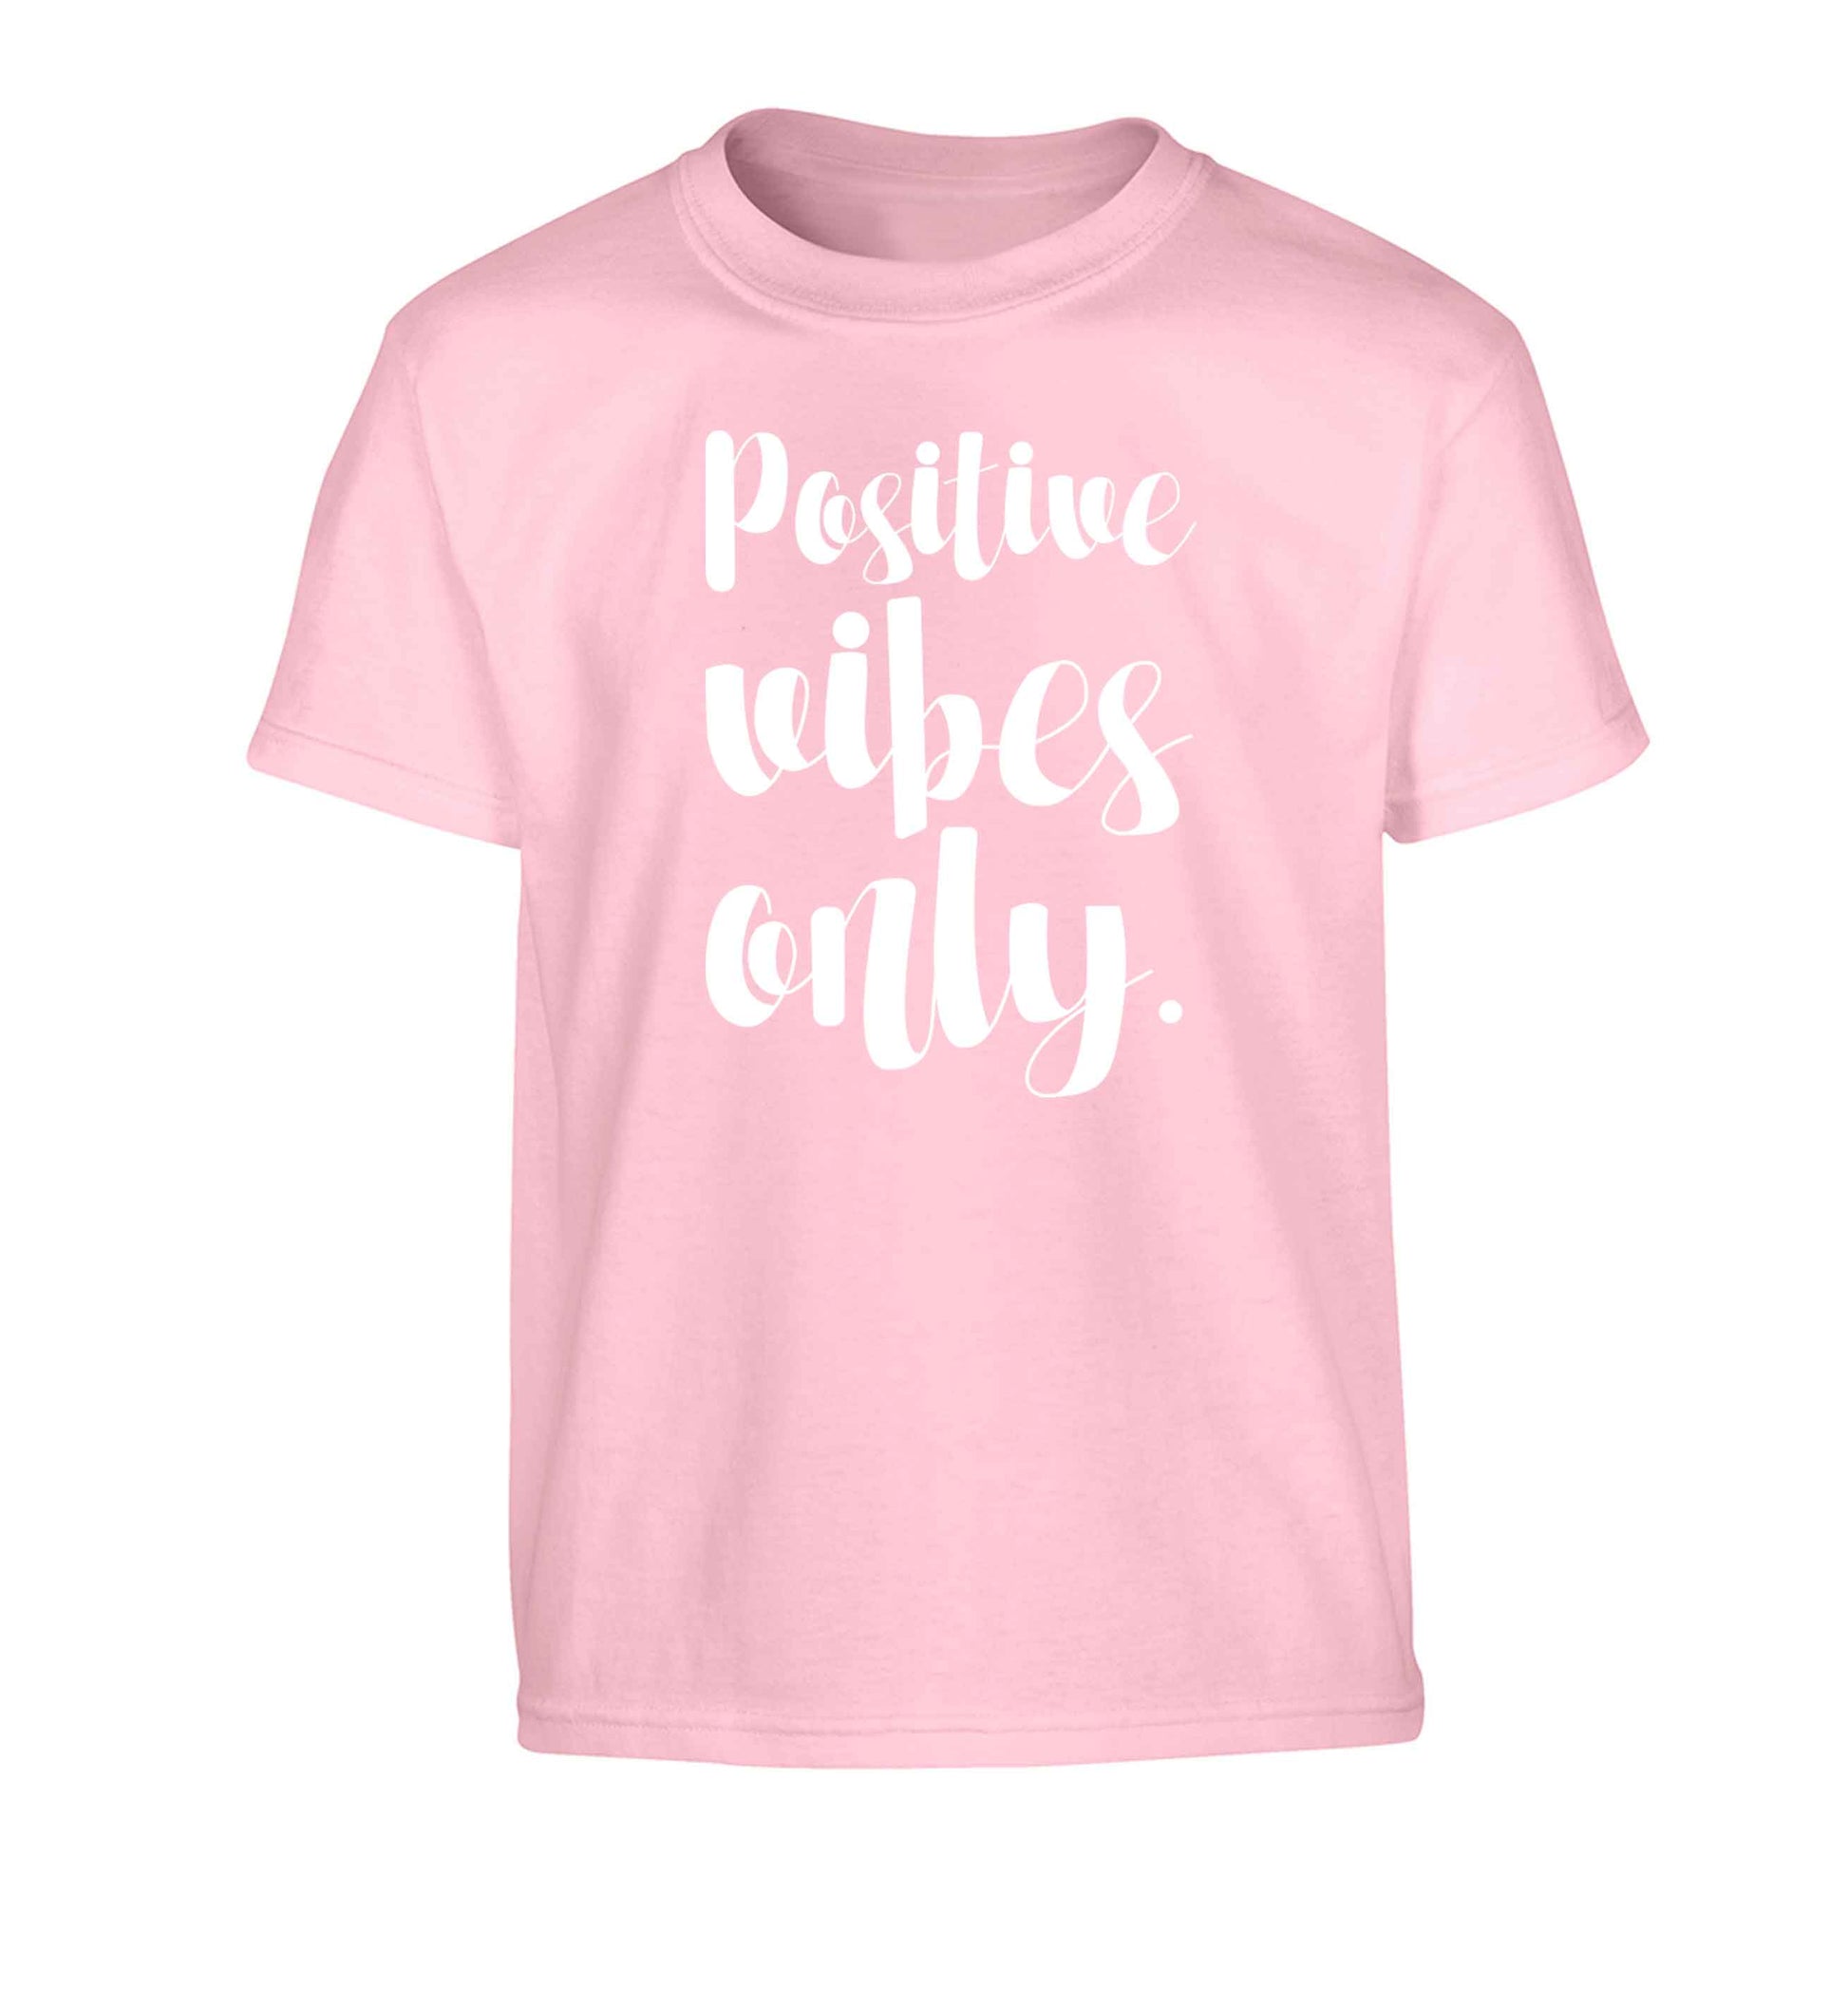 Positive vibes only Children's light pink Tshirt 12-13 Years